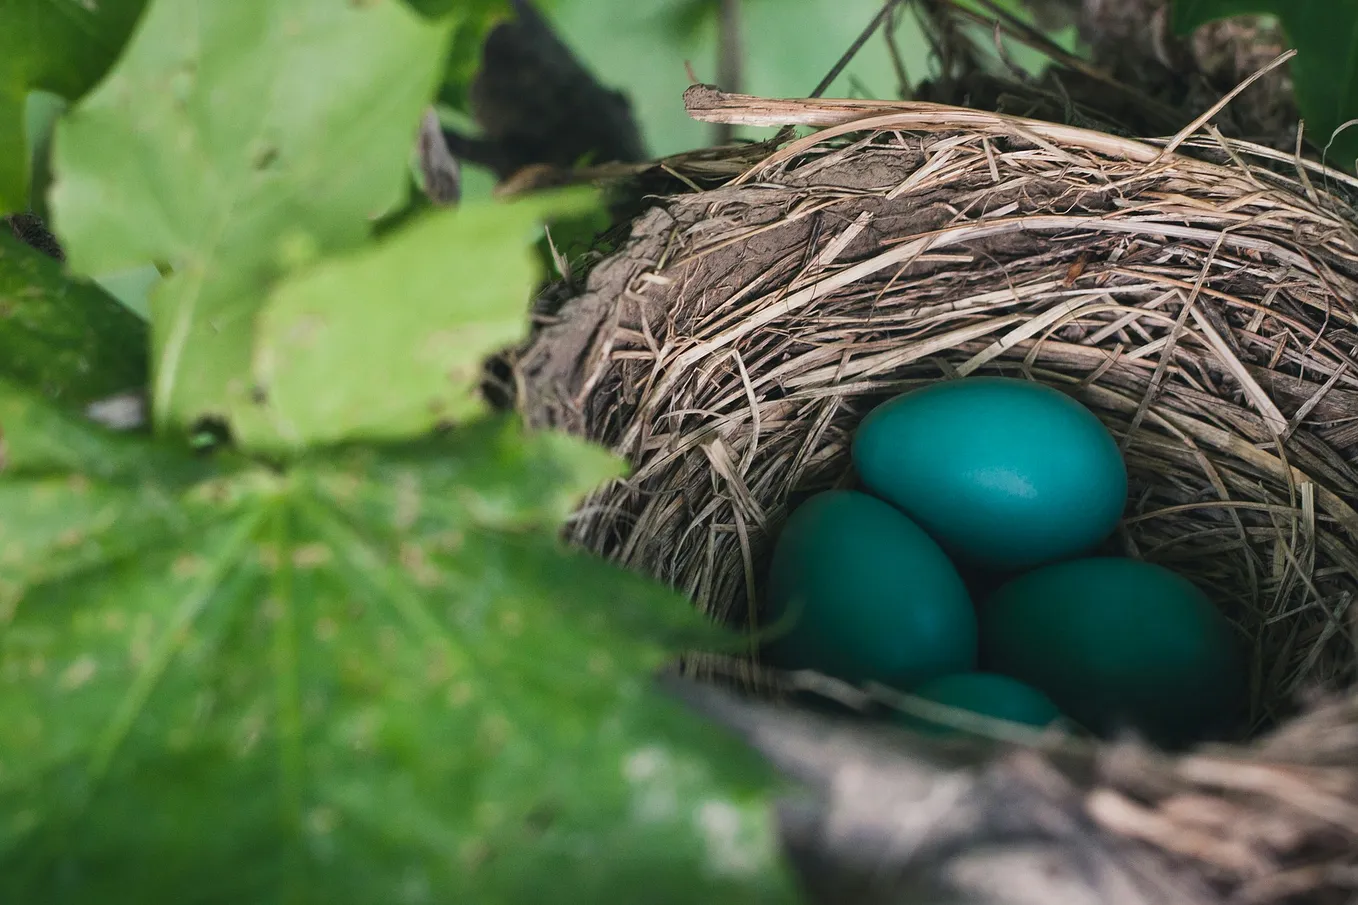 blue robin’s eggs in a nest